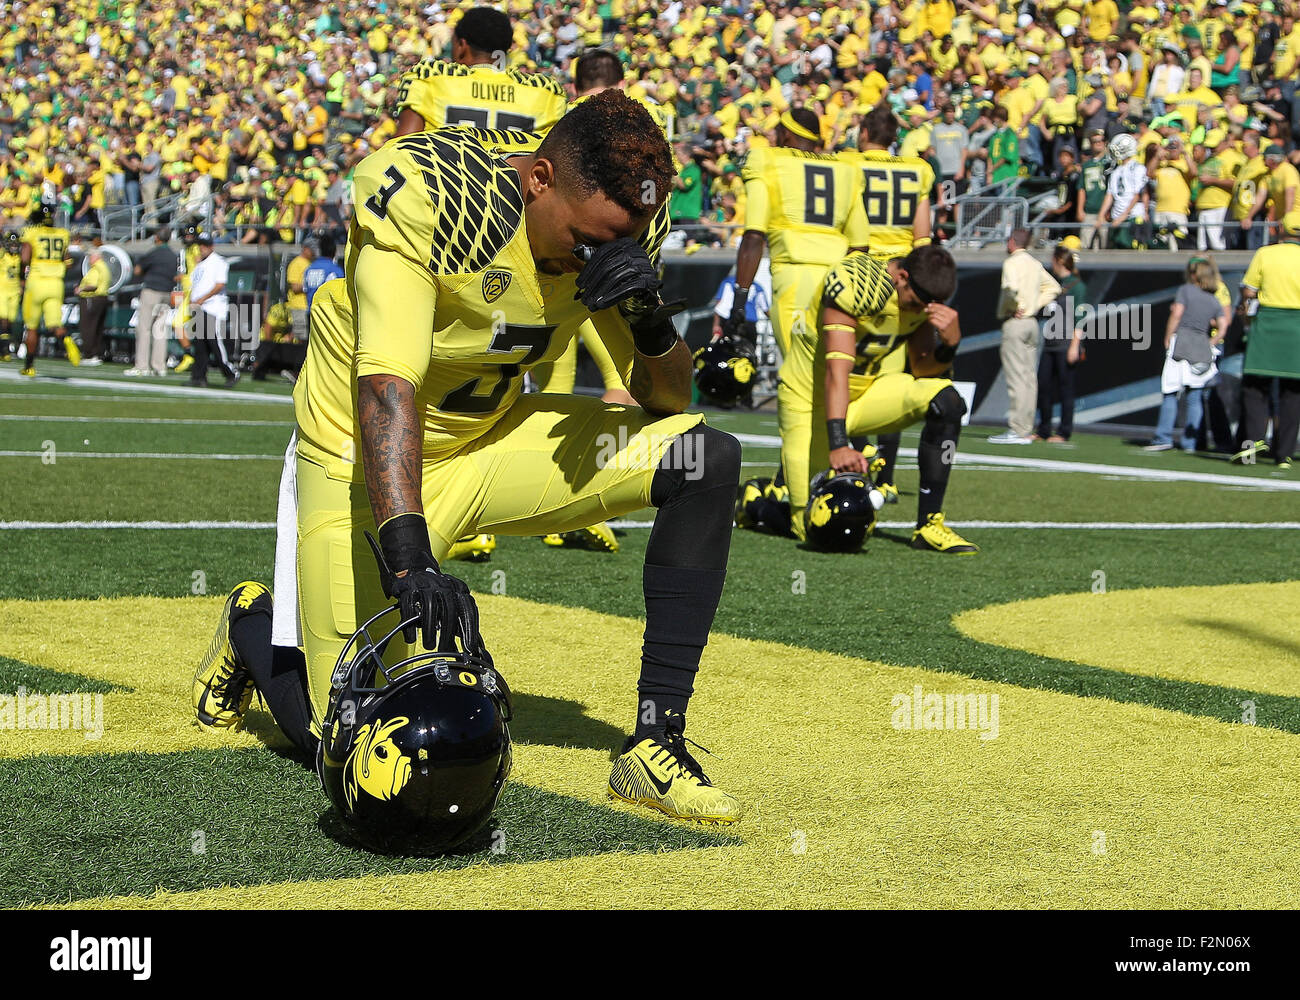 Autzen Stadium, Eugene, OR, USA. 19th Sep, 2015. Oregon Ducks safety Tyree Robinson (3) pauses for a moment of prayer prior to the start of the NCAA football game between the Ducks and the Georgia State Panthers at Autzen Stadium, Eugene, OR. Larry C. Lawson/CSM/Alamy Live News Stock Photo